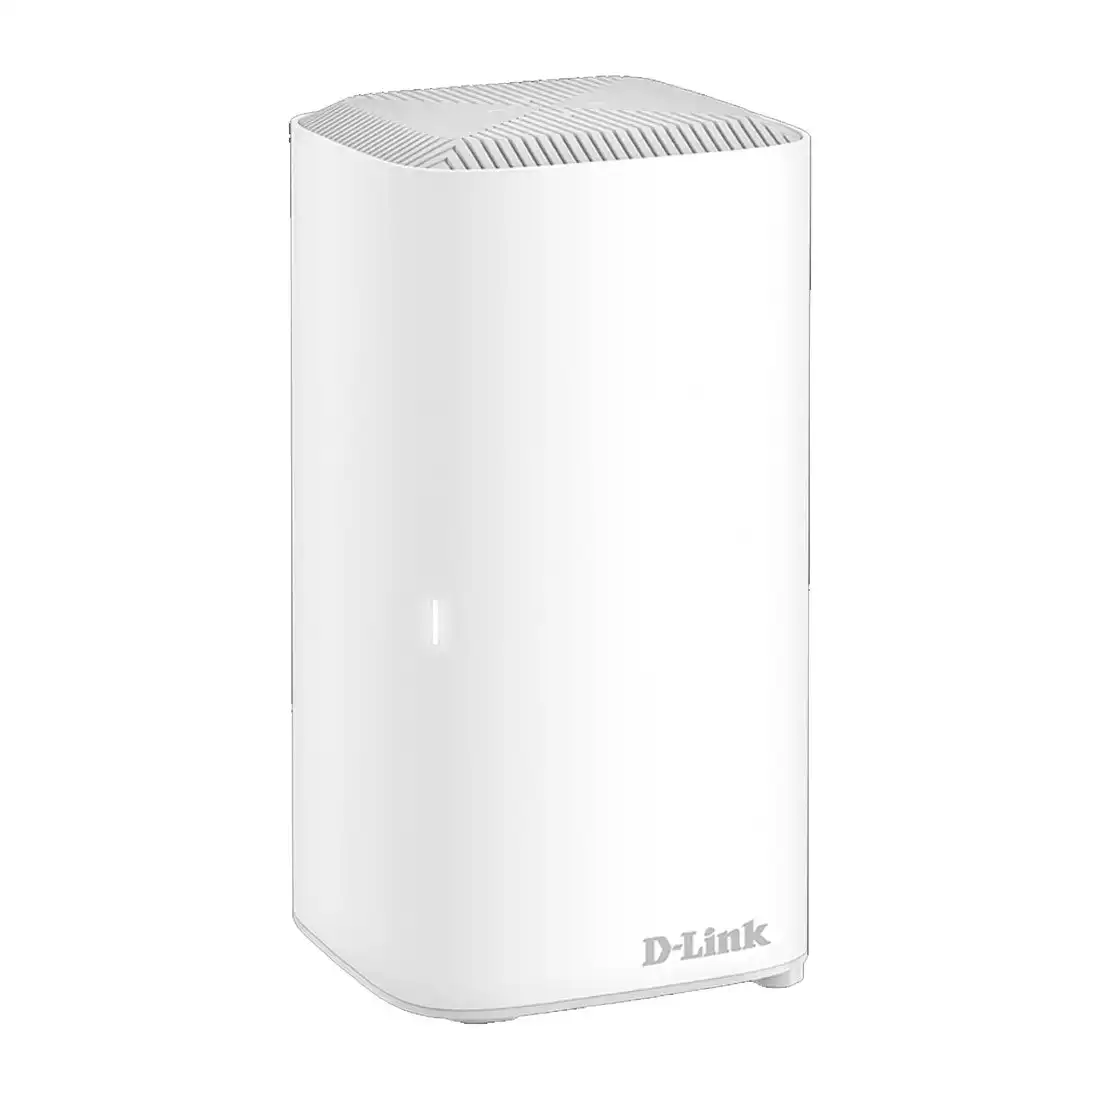 D-Link COVR-X1870 AX1800 Dual Band Mesh Wi-Fi 6 Router/ Add-On Point